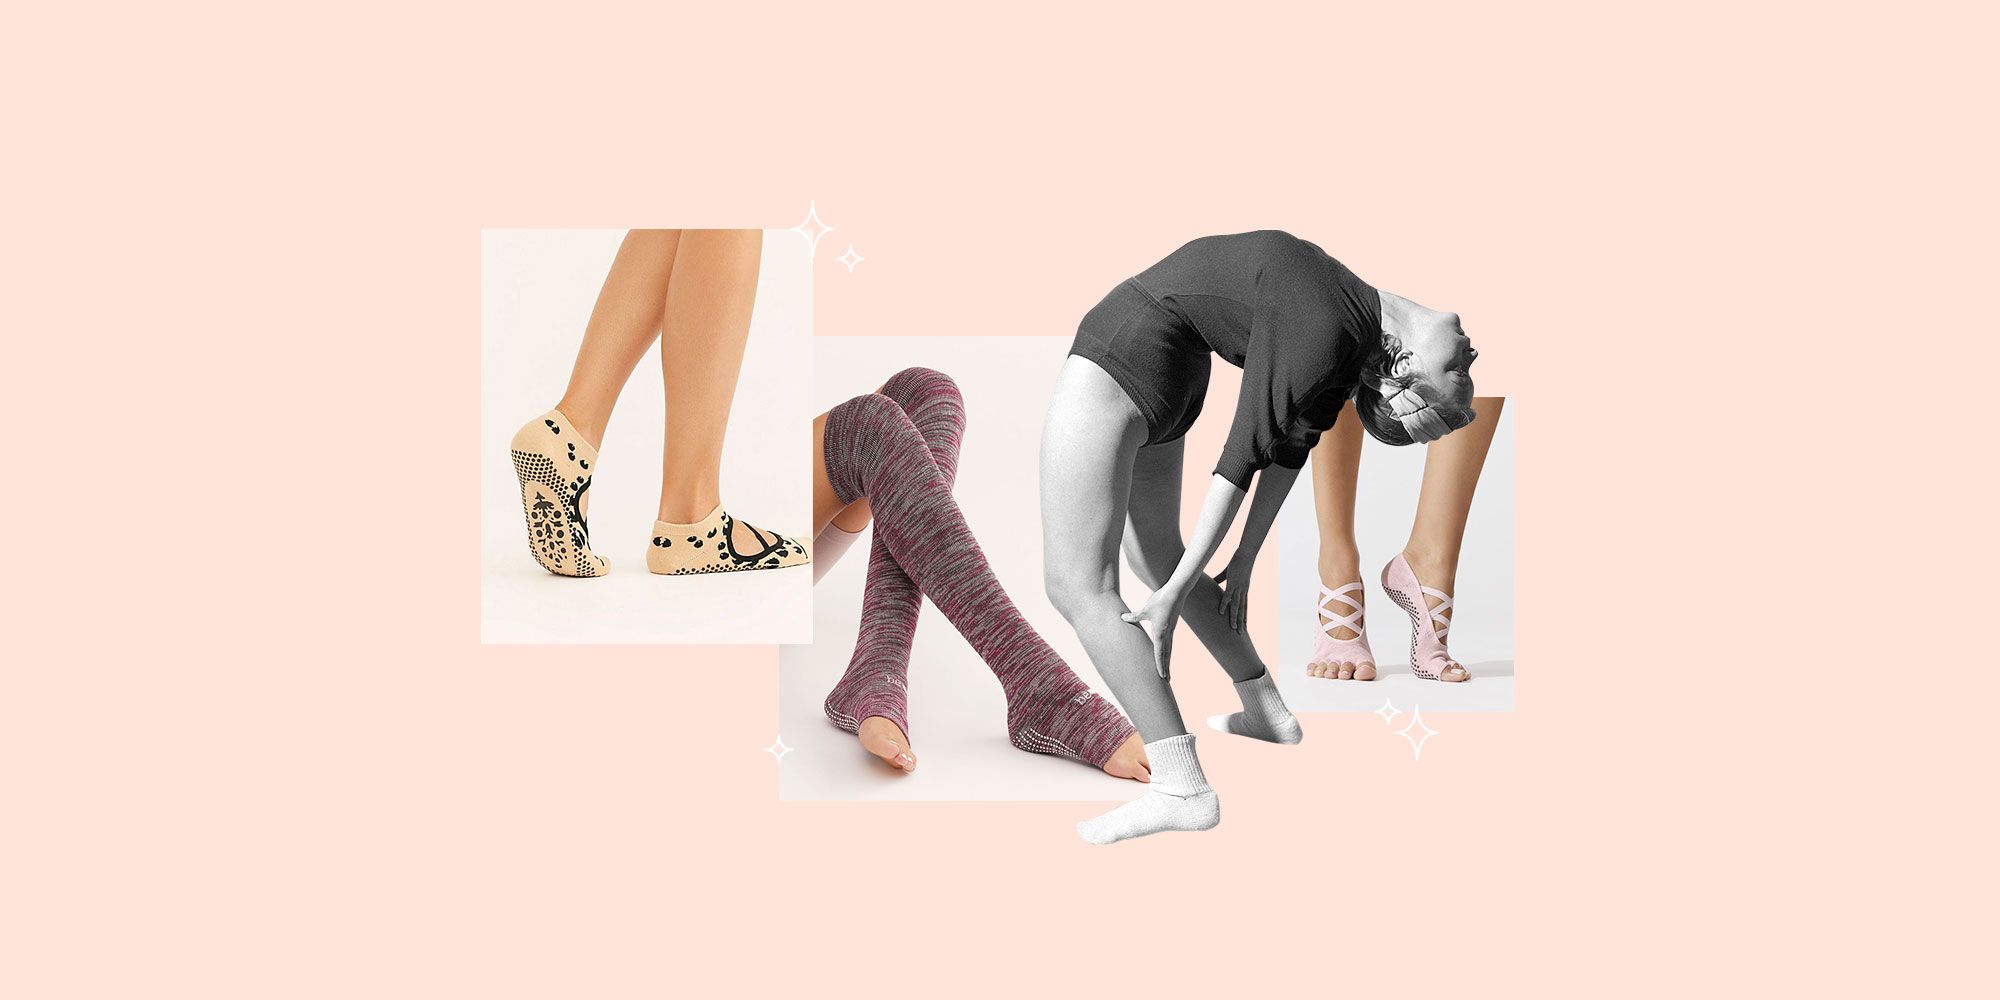 The 12 Best Yoga Socks for Your Fave At-Home Workout